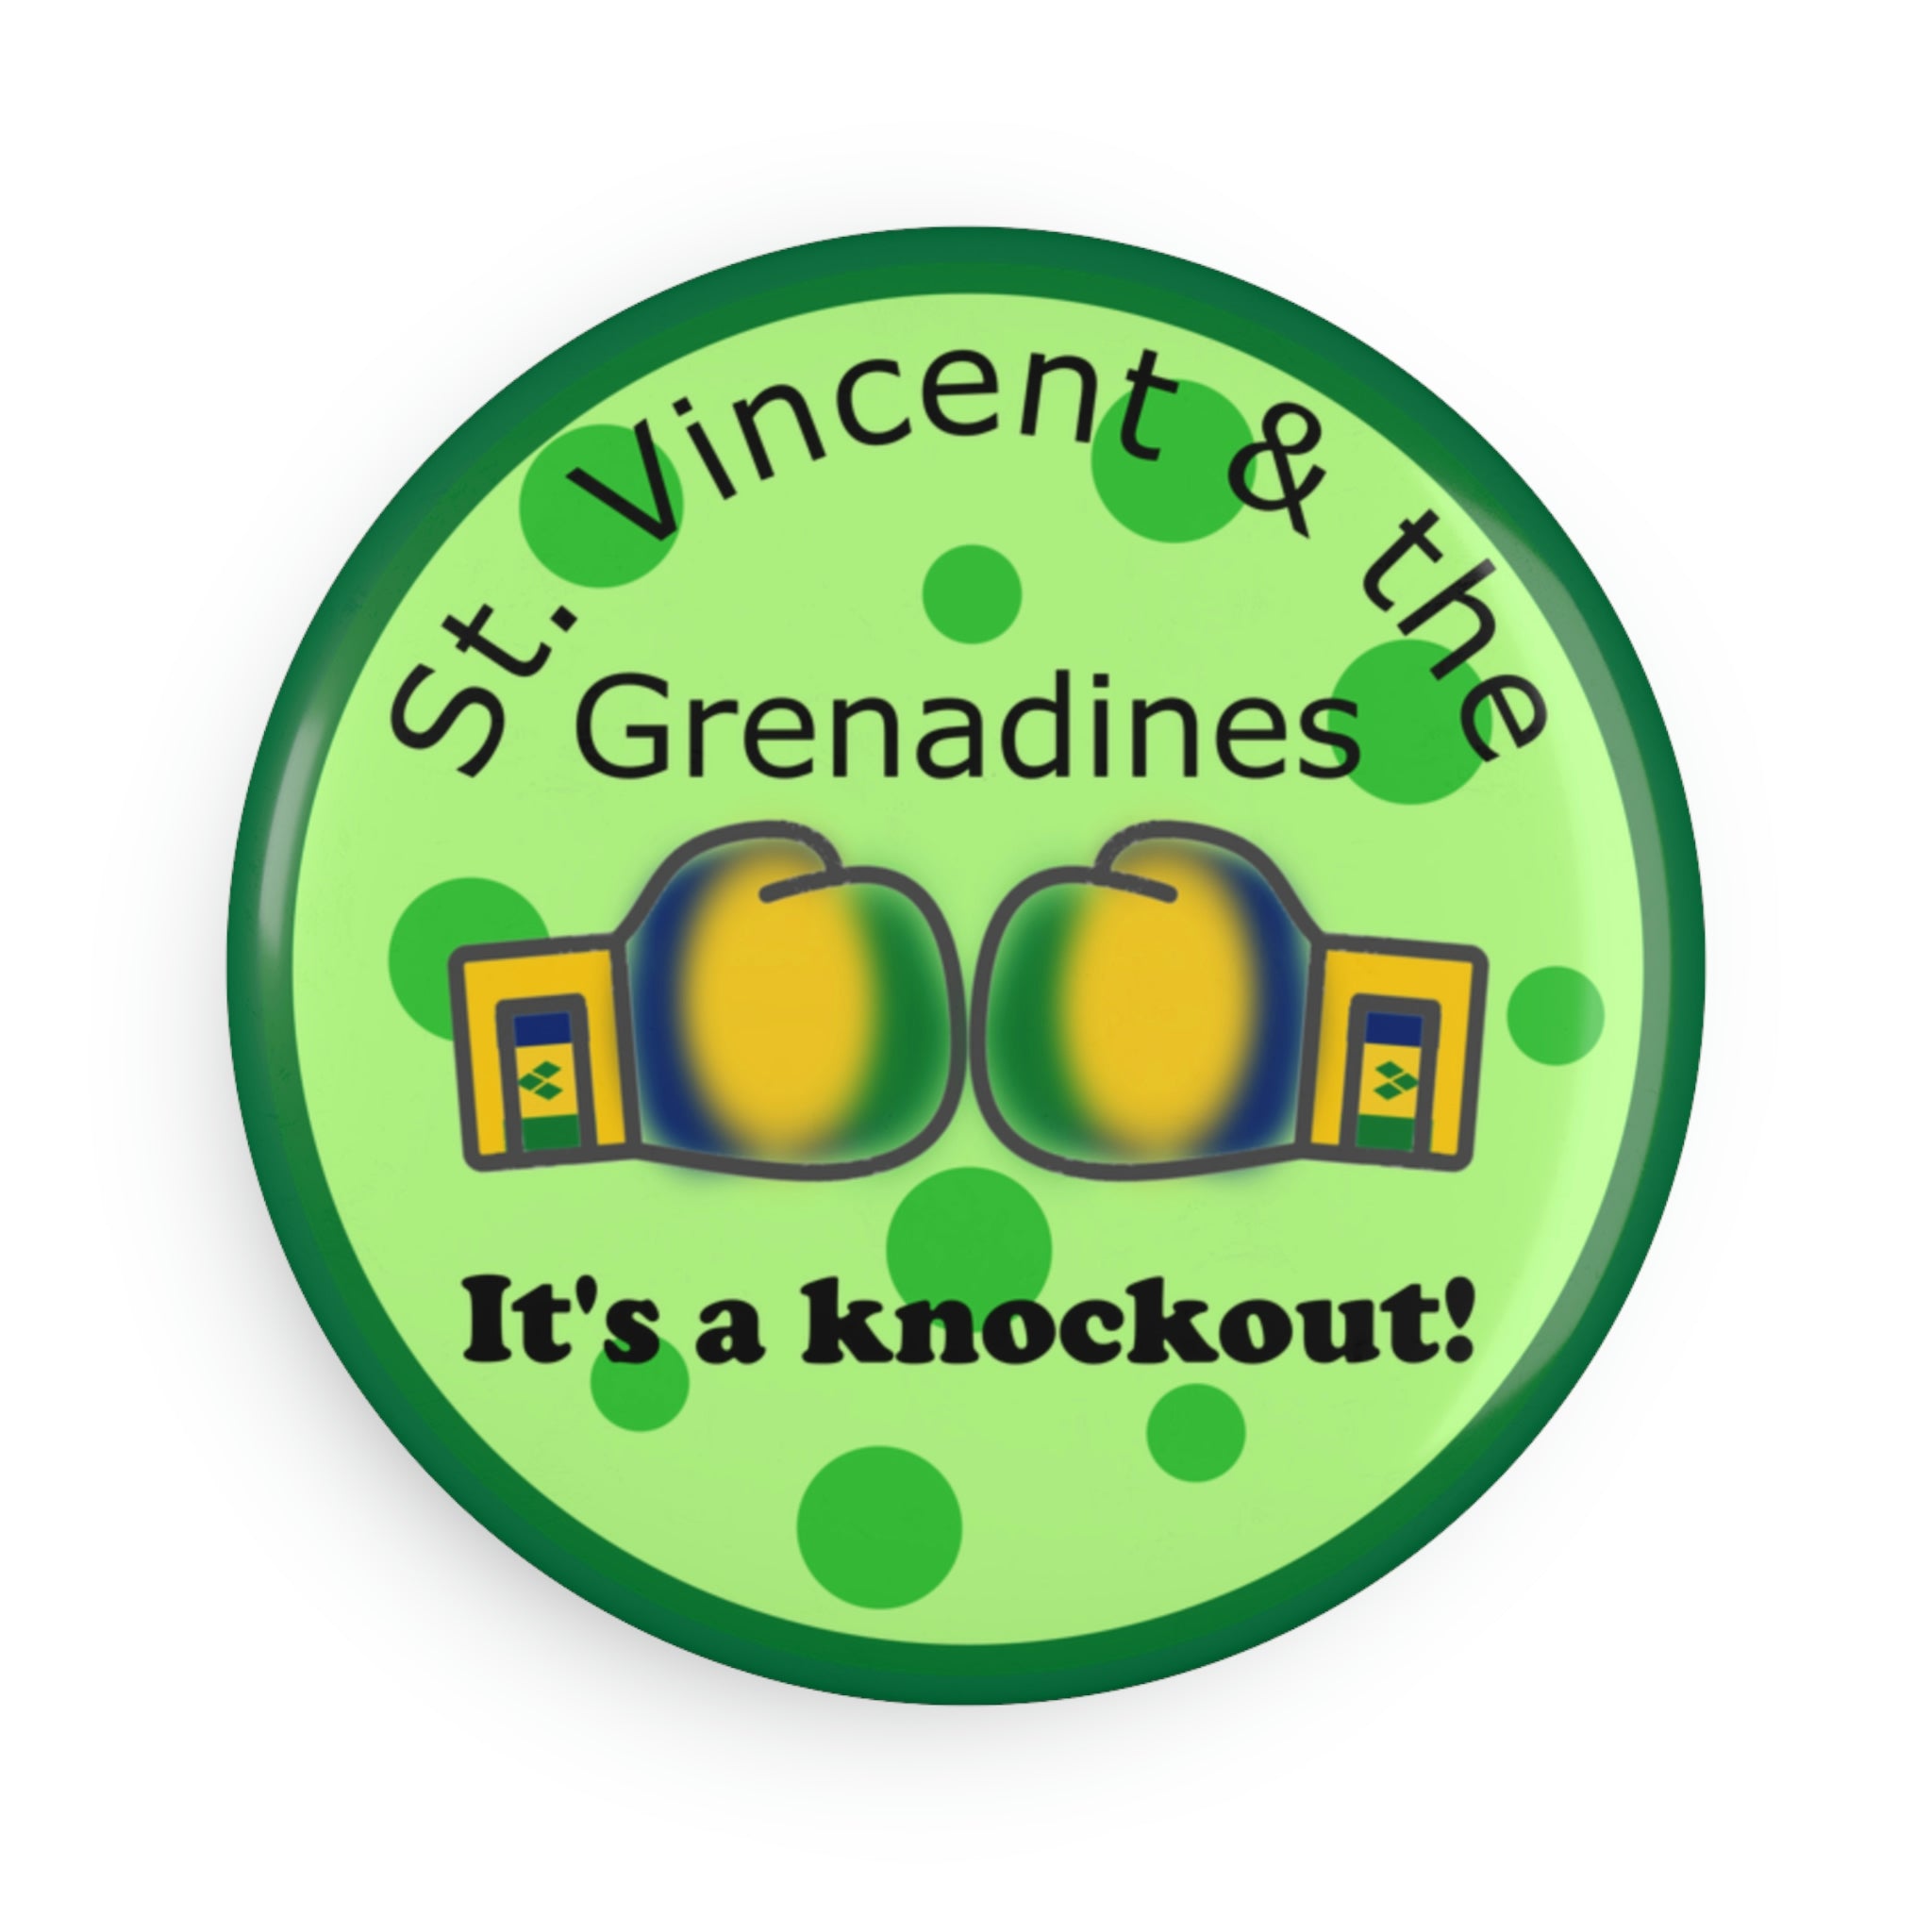 Green St. Vincent and the Grenadines round metal button magnet with national colored boxing gloves with slogan it's a knockout.